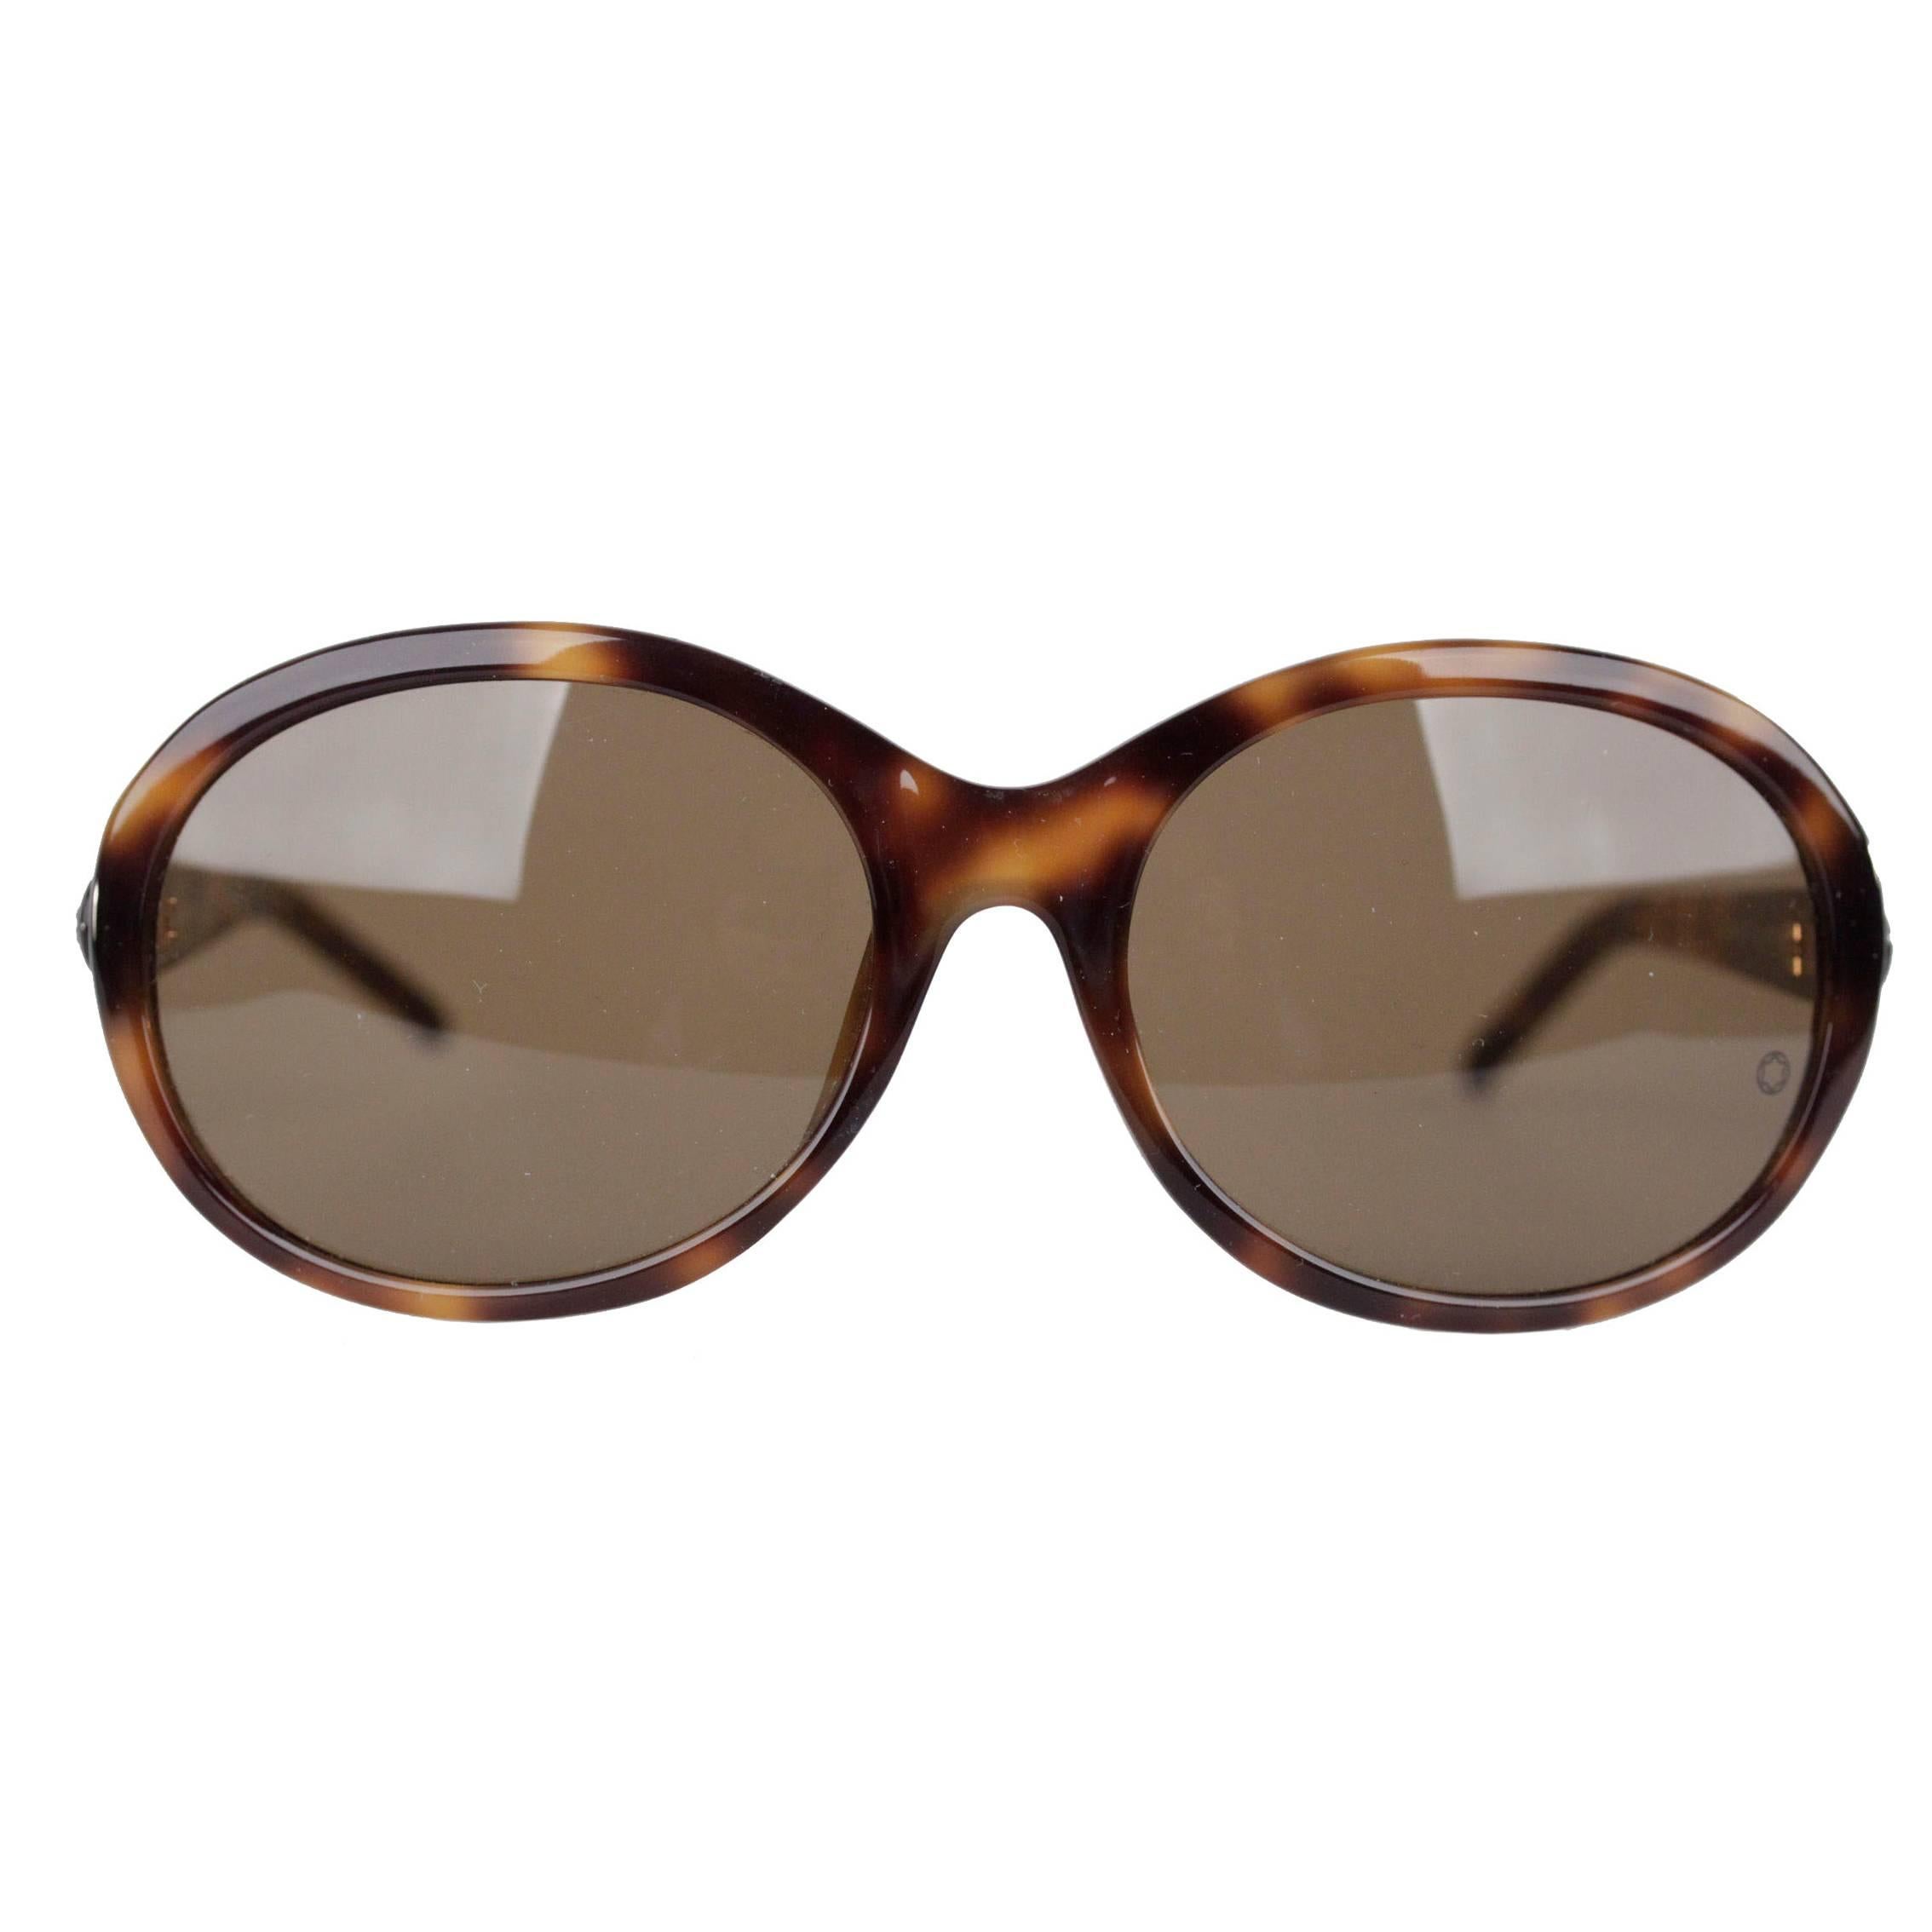 Montblanc Oval Oversized Brown Mint Sunglasses MB138S T32 59mm 125 NOS